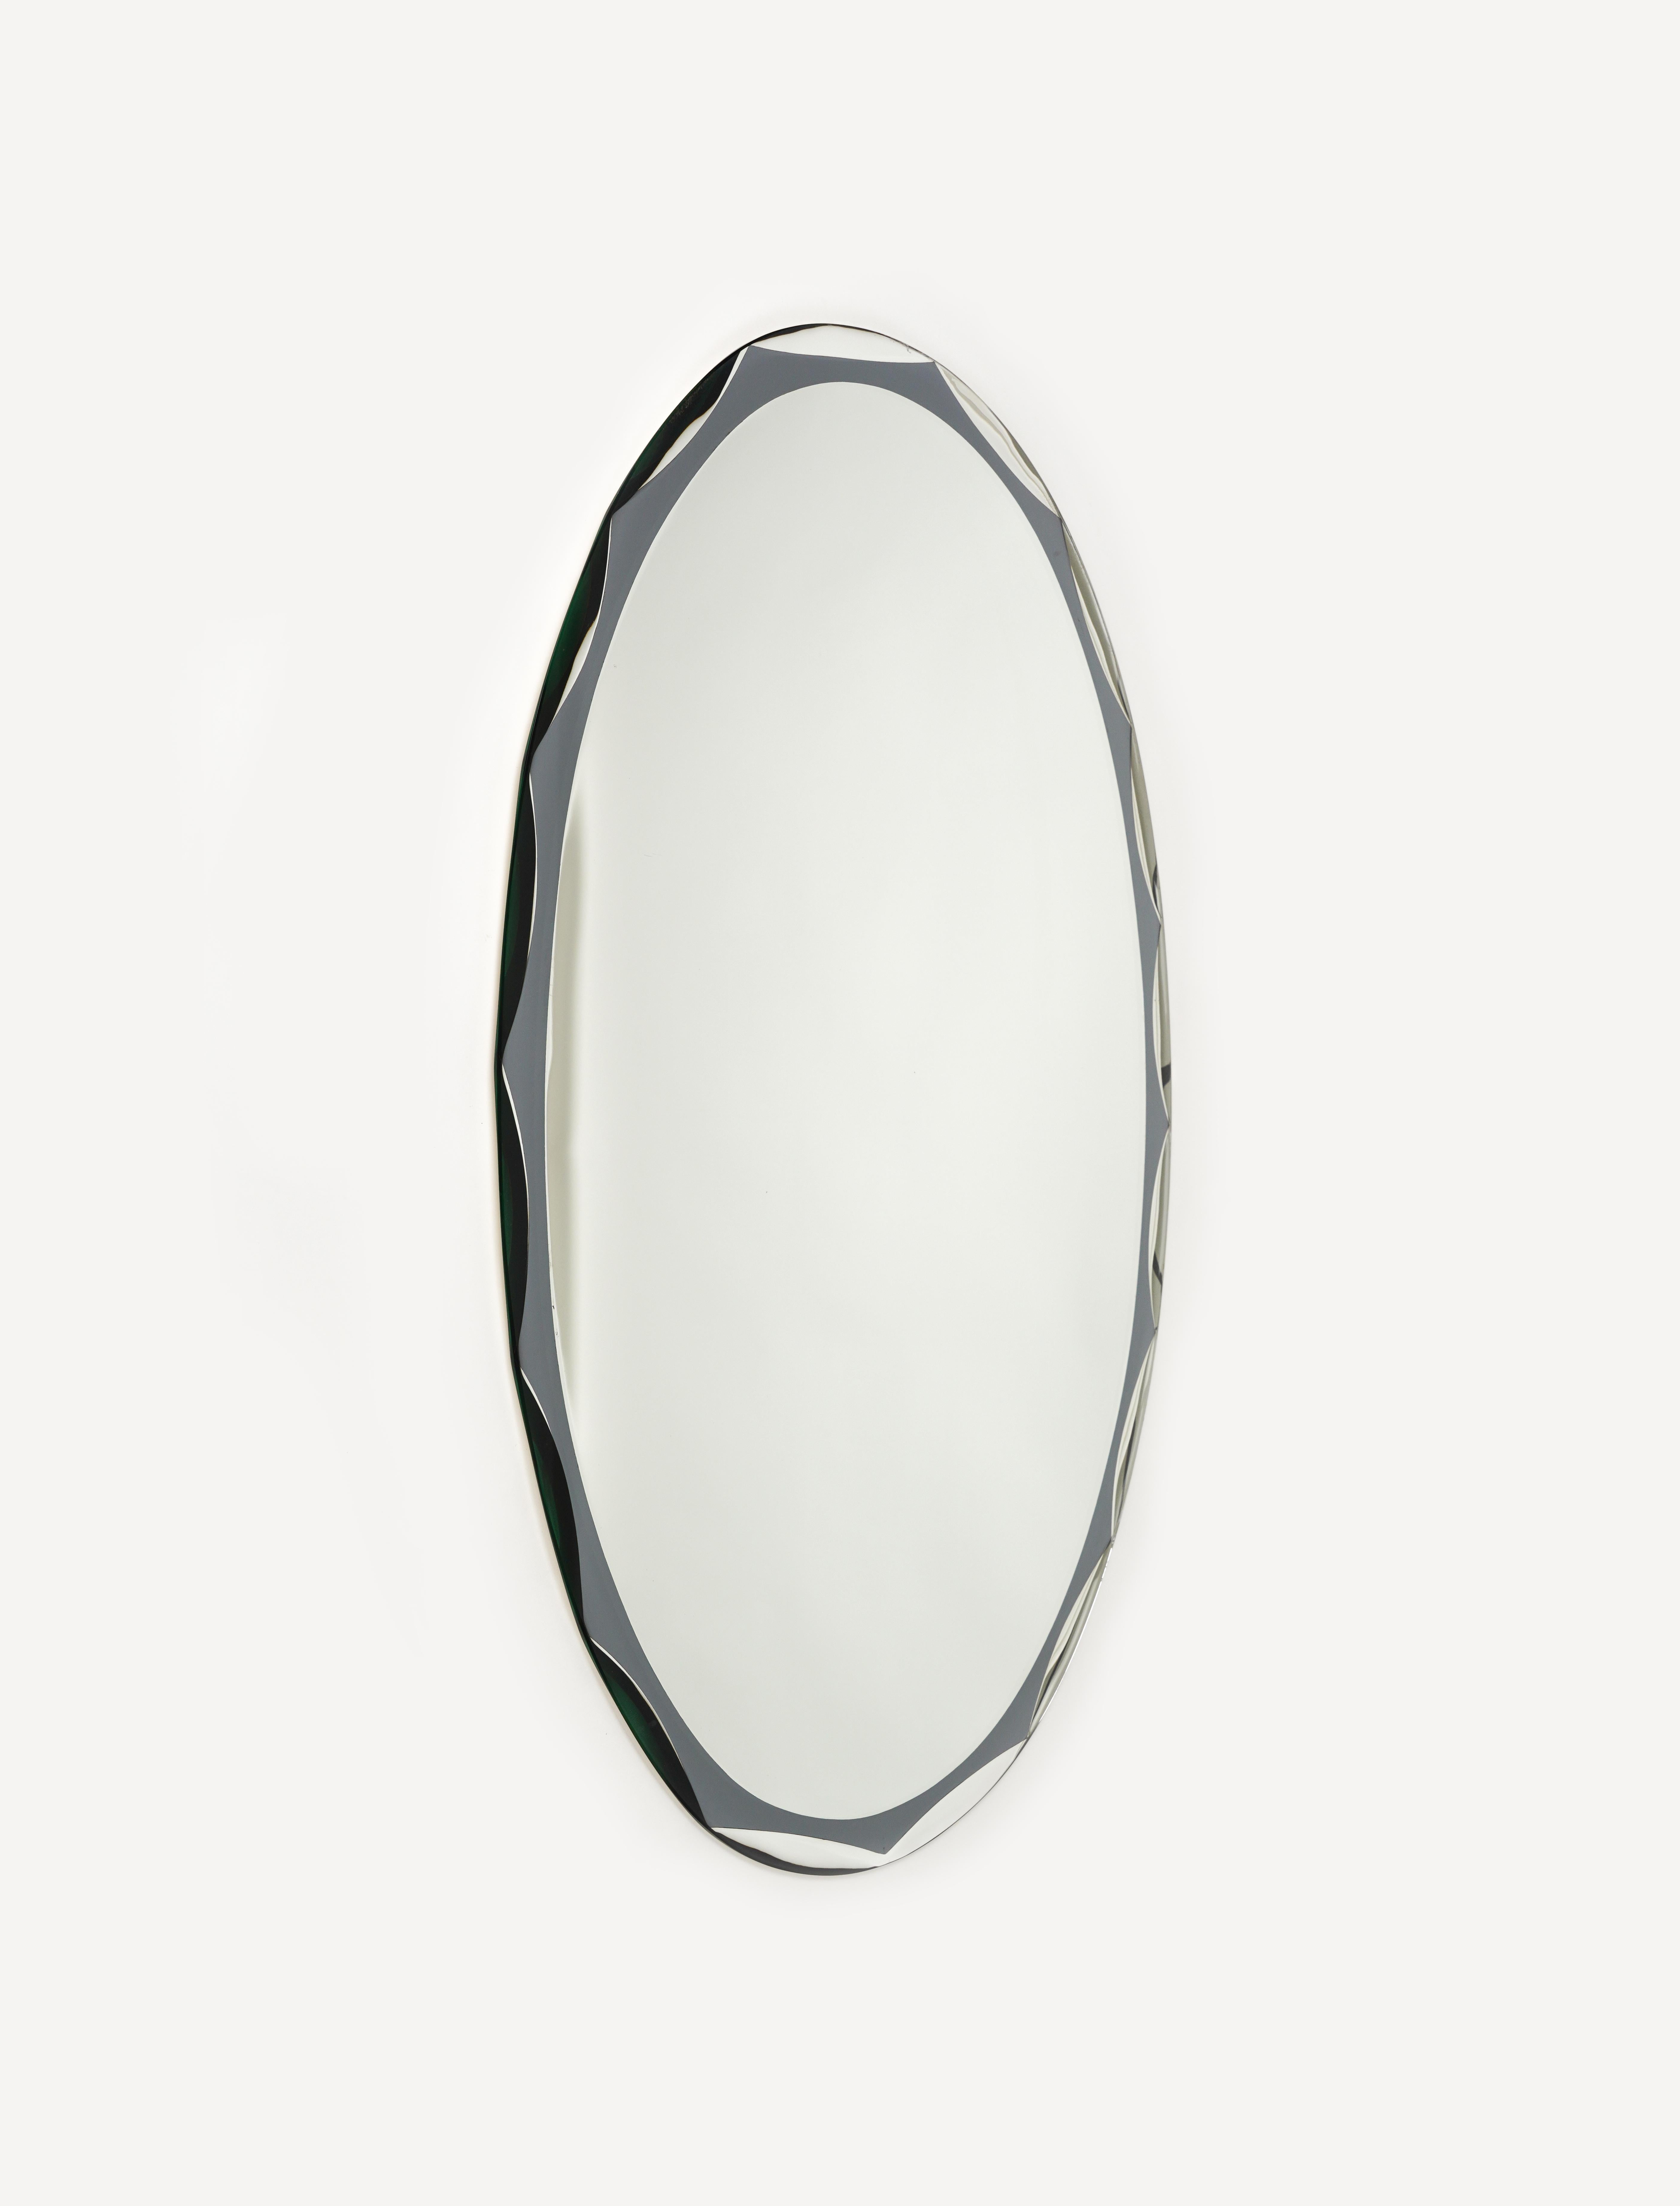 Midcentury Oval Wall Mirror Attributed to Metalvetro Galvorame, Italy 1970s In Good Condition For Sale In Rome, IT